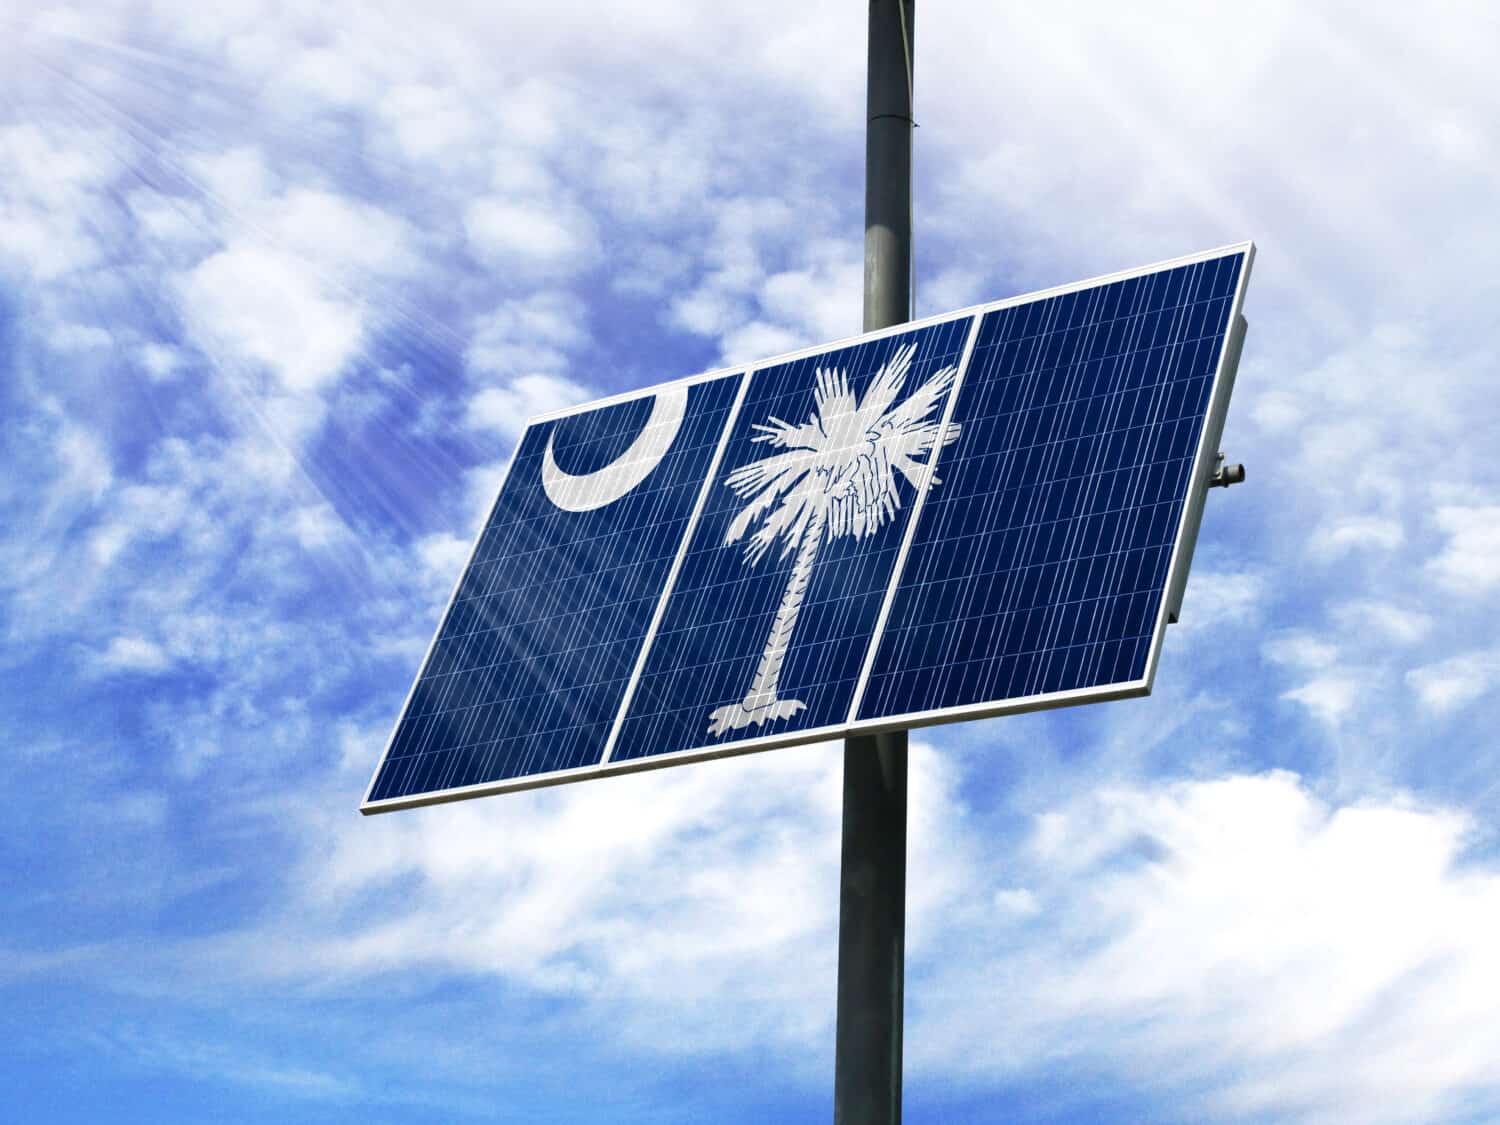 Solar panels against a blue sky with a picture of the flag State of South Carolina